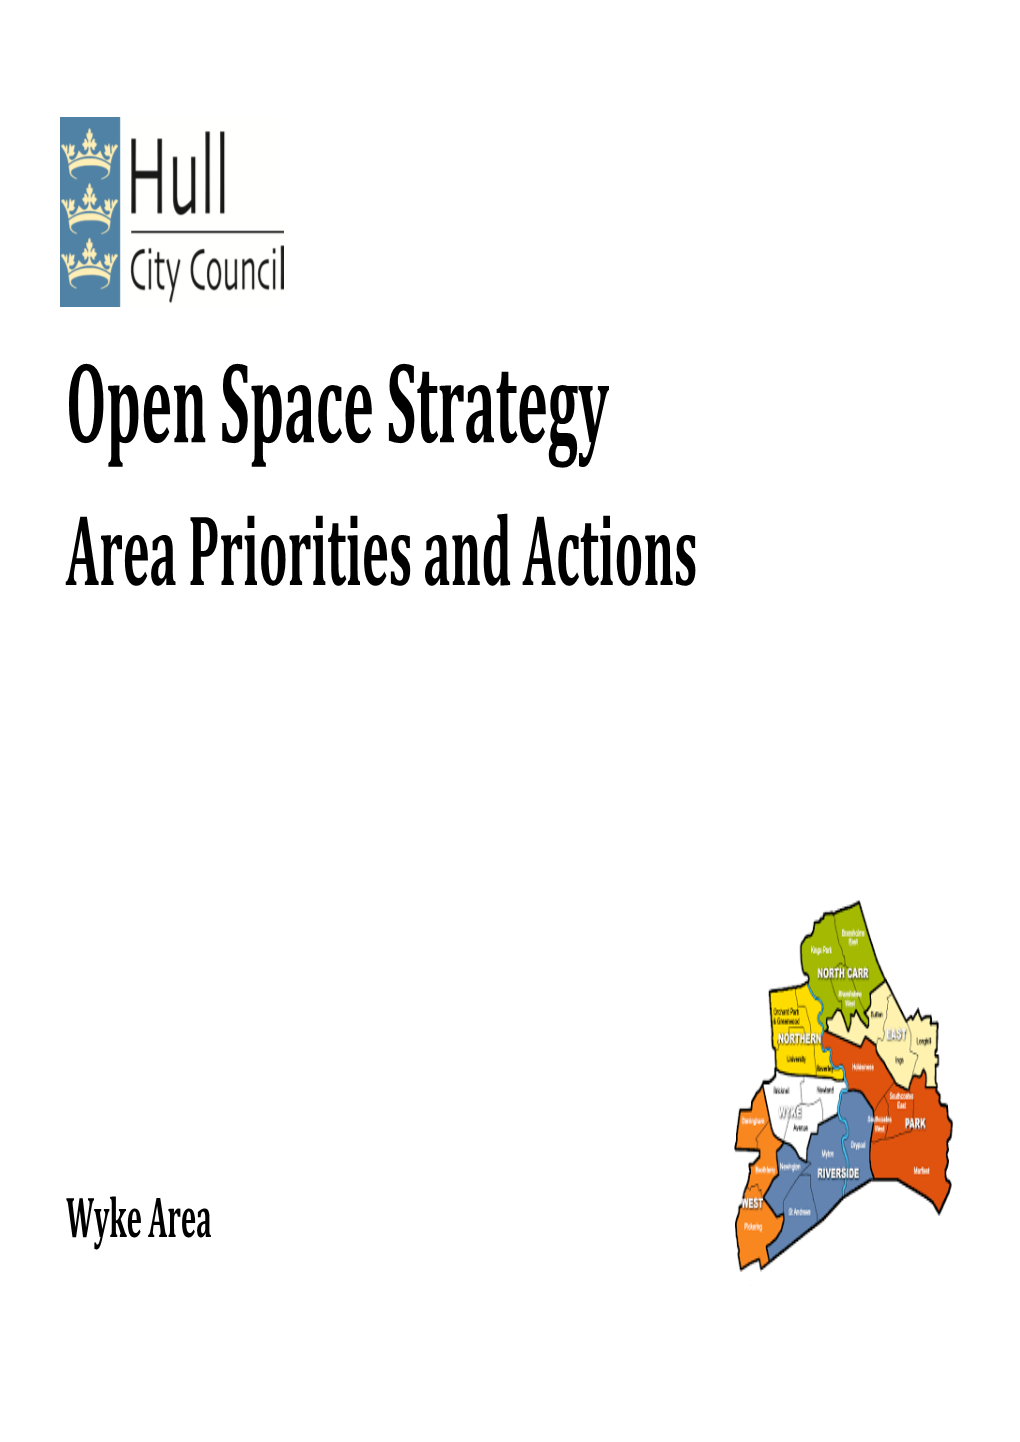 Open Space Strategy Area Priorities and Actions